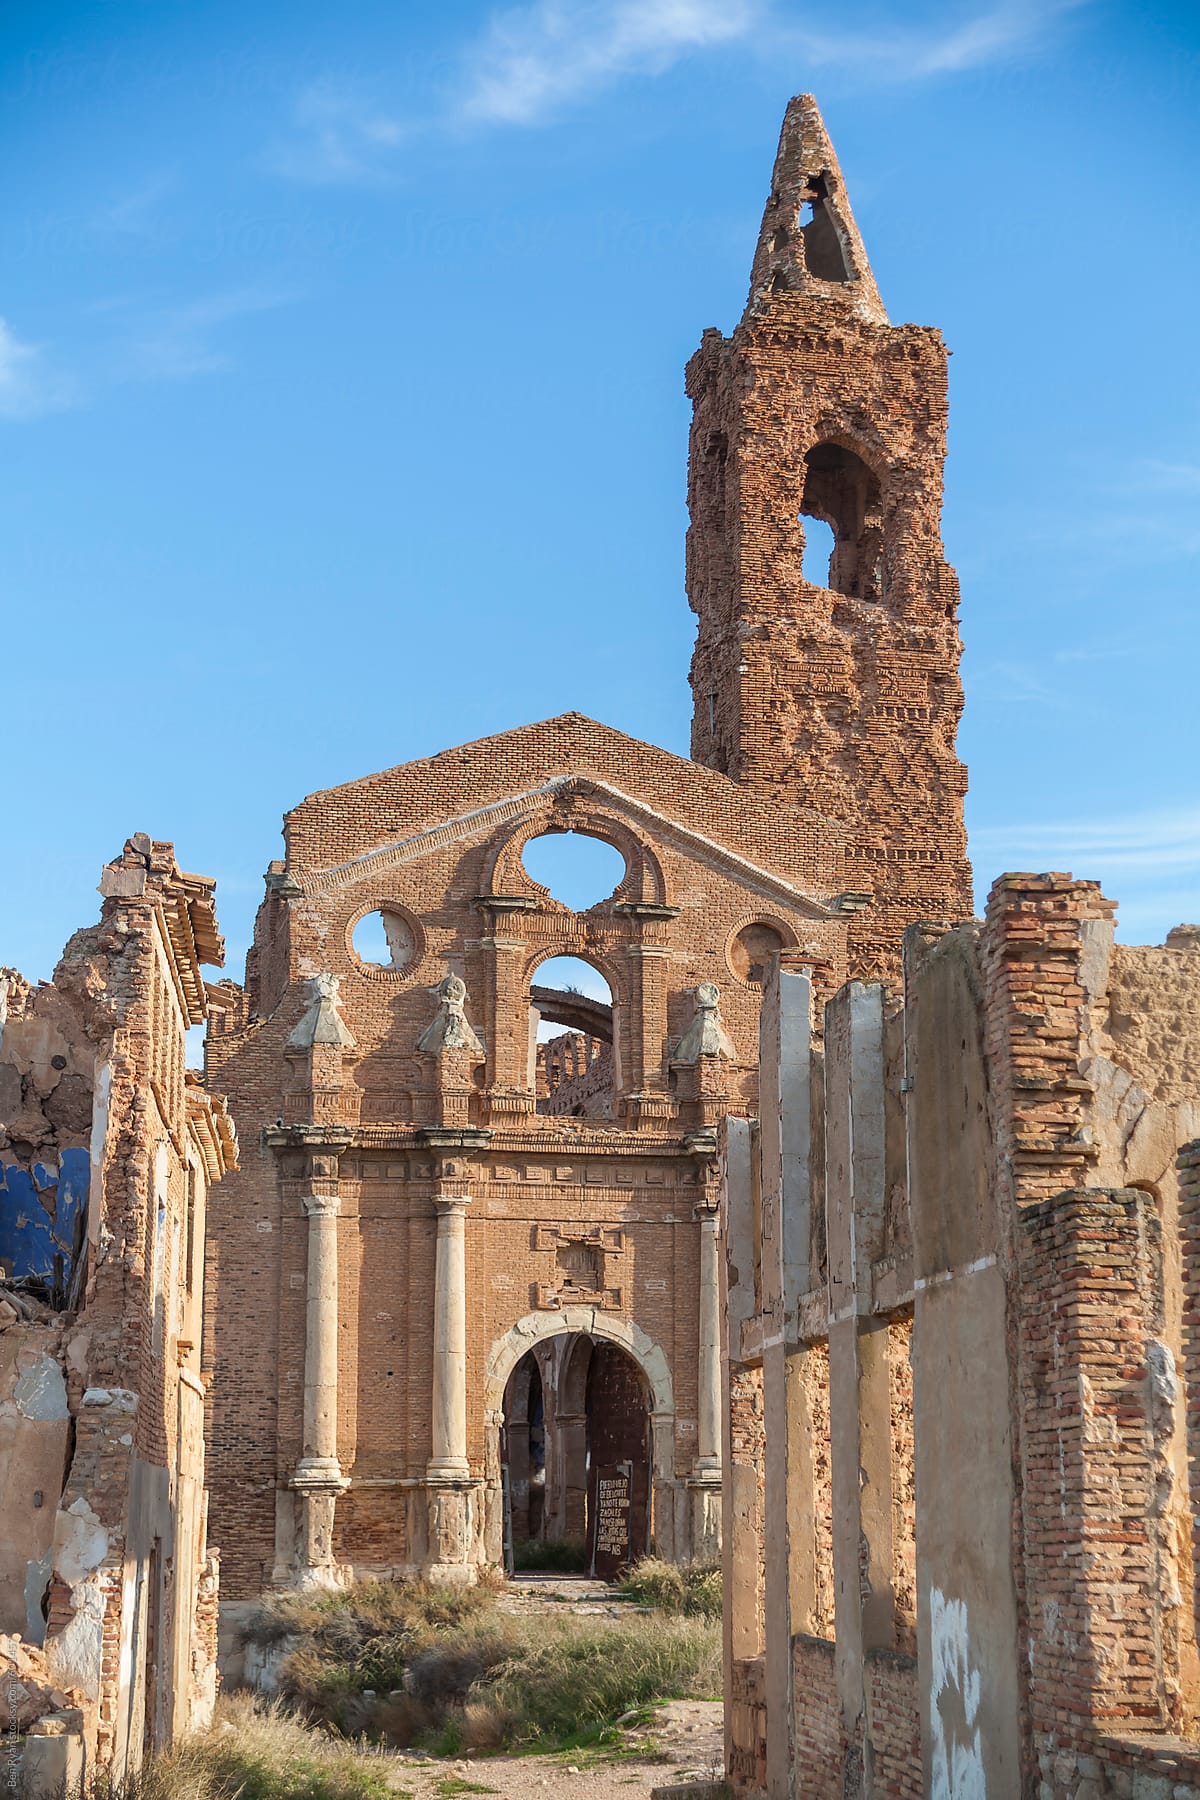 Plaza and facade of church destroyed in civil war